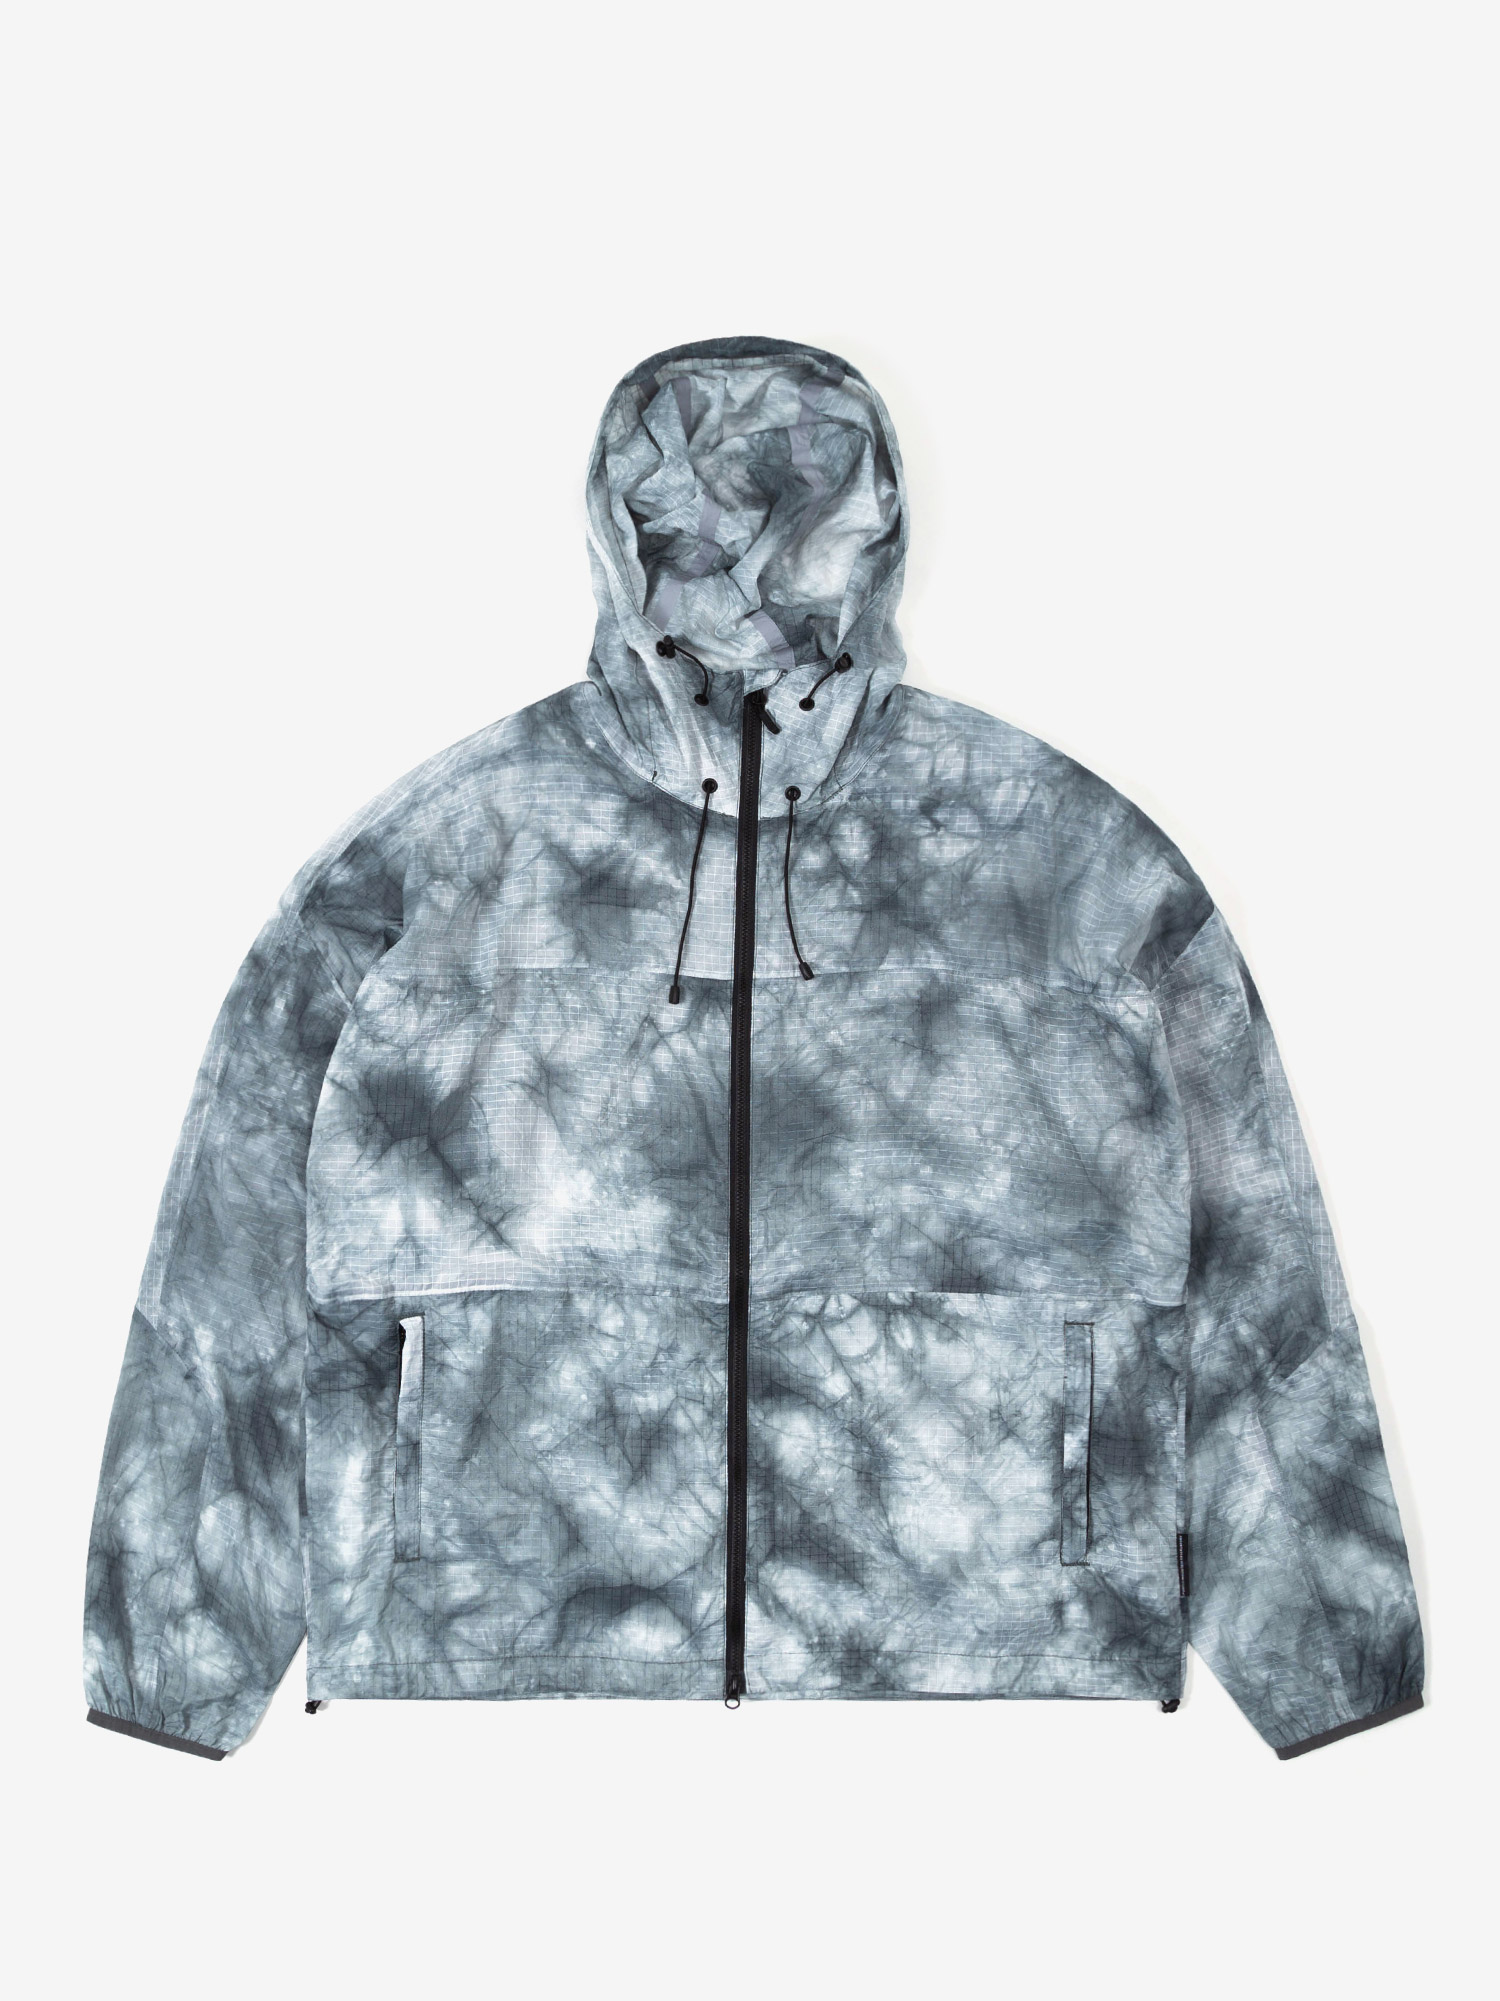 Featured image for “ELEMENTS JACKET RIPSTOP ICE DYE”